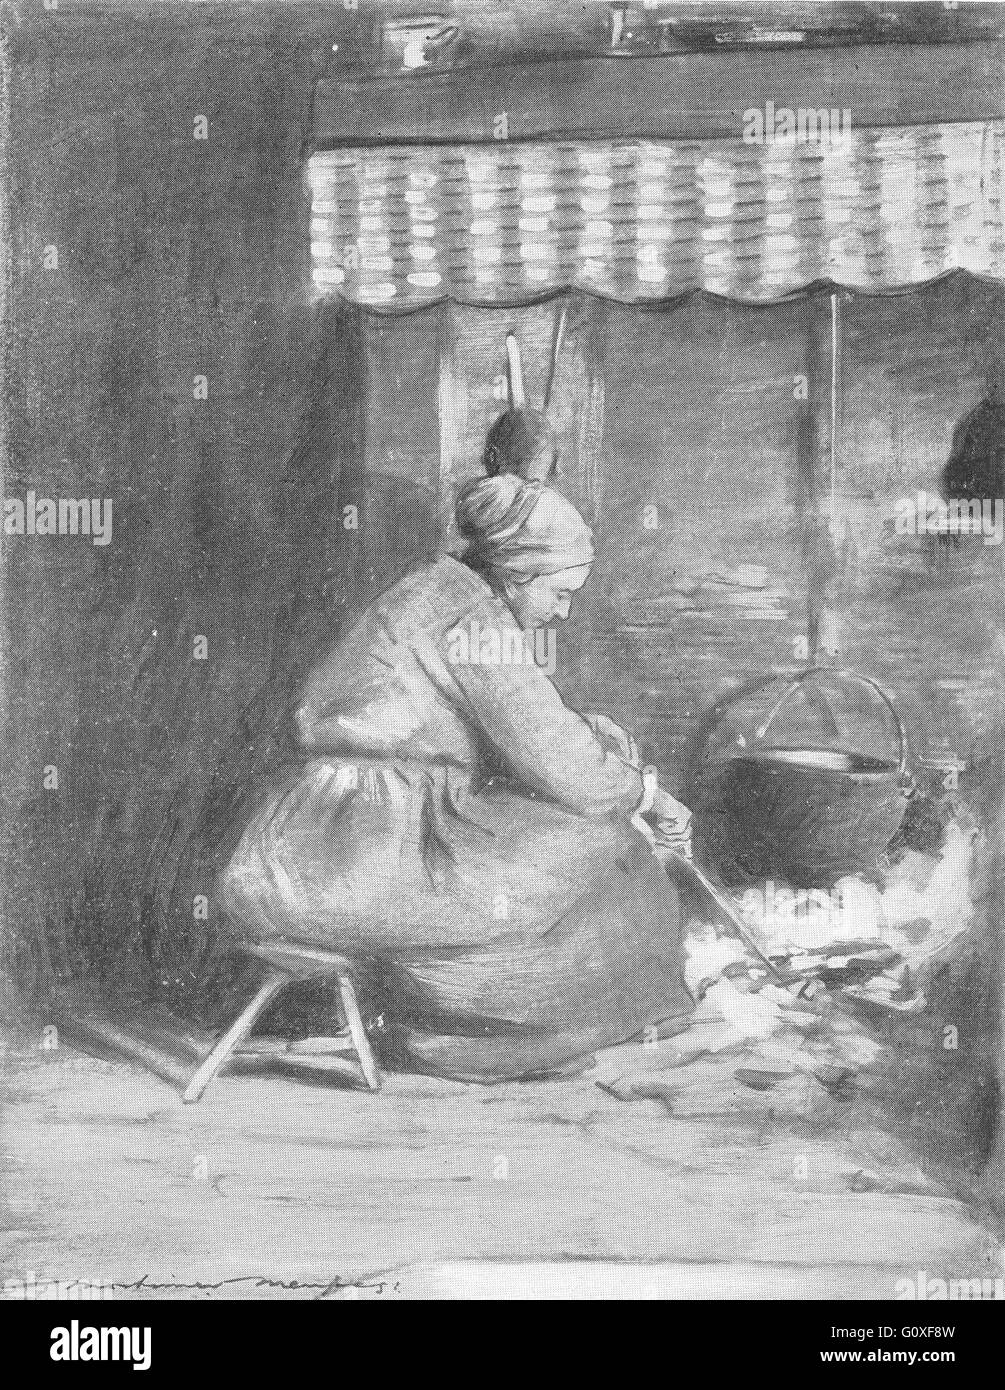 FRANCE: Normandy: An Old-fashioned Hearth, vintage print 1920 Stock Photo